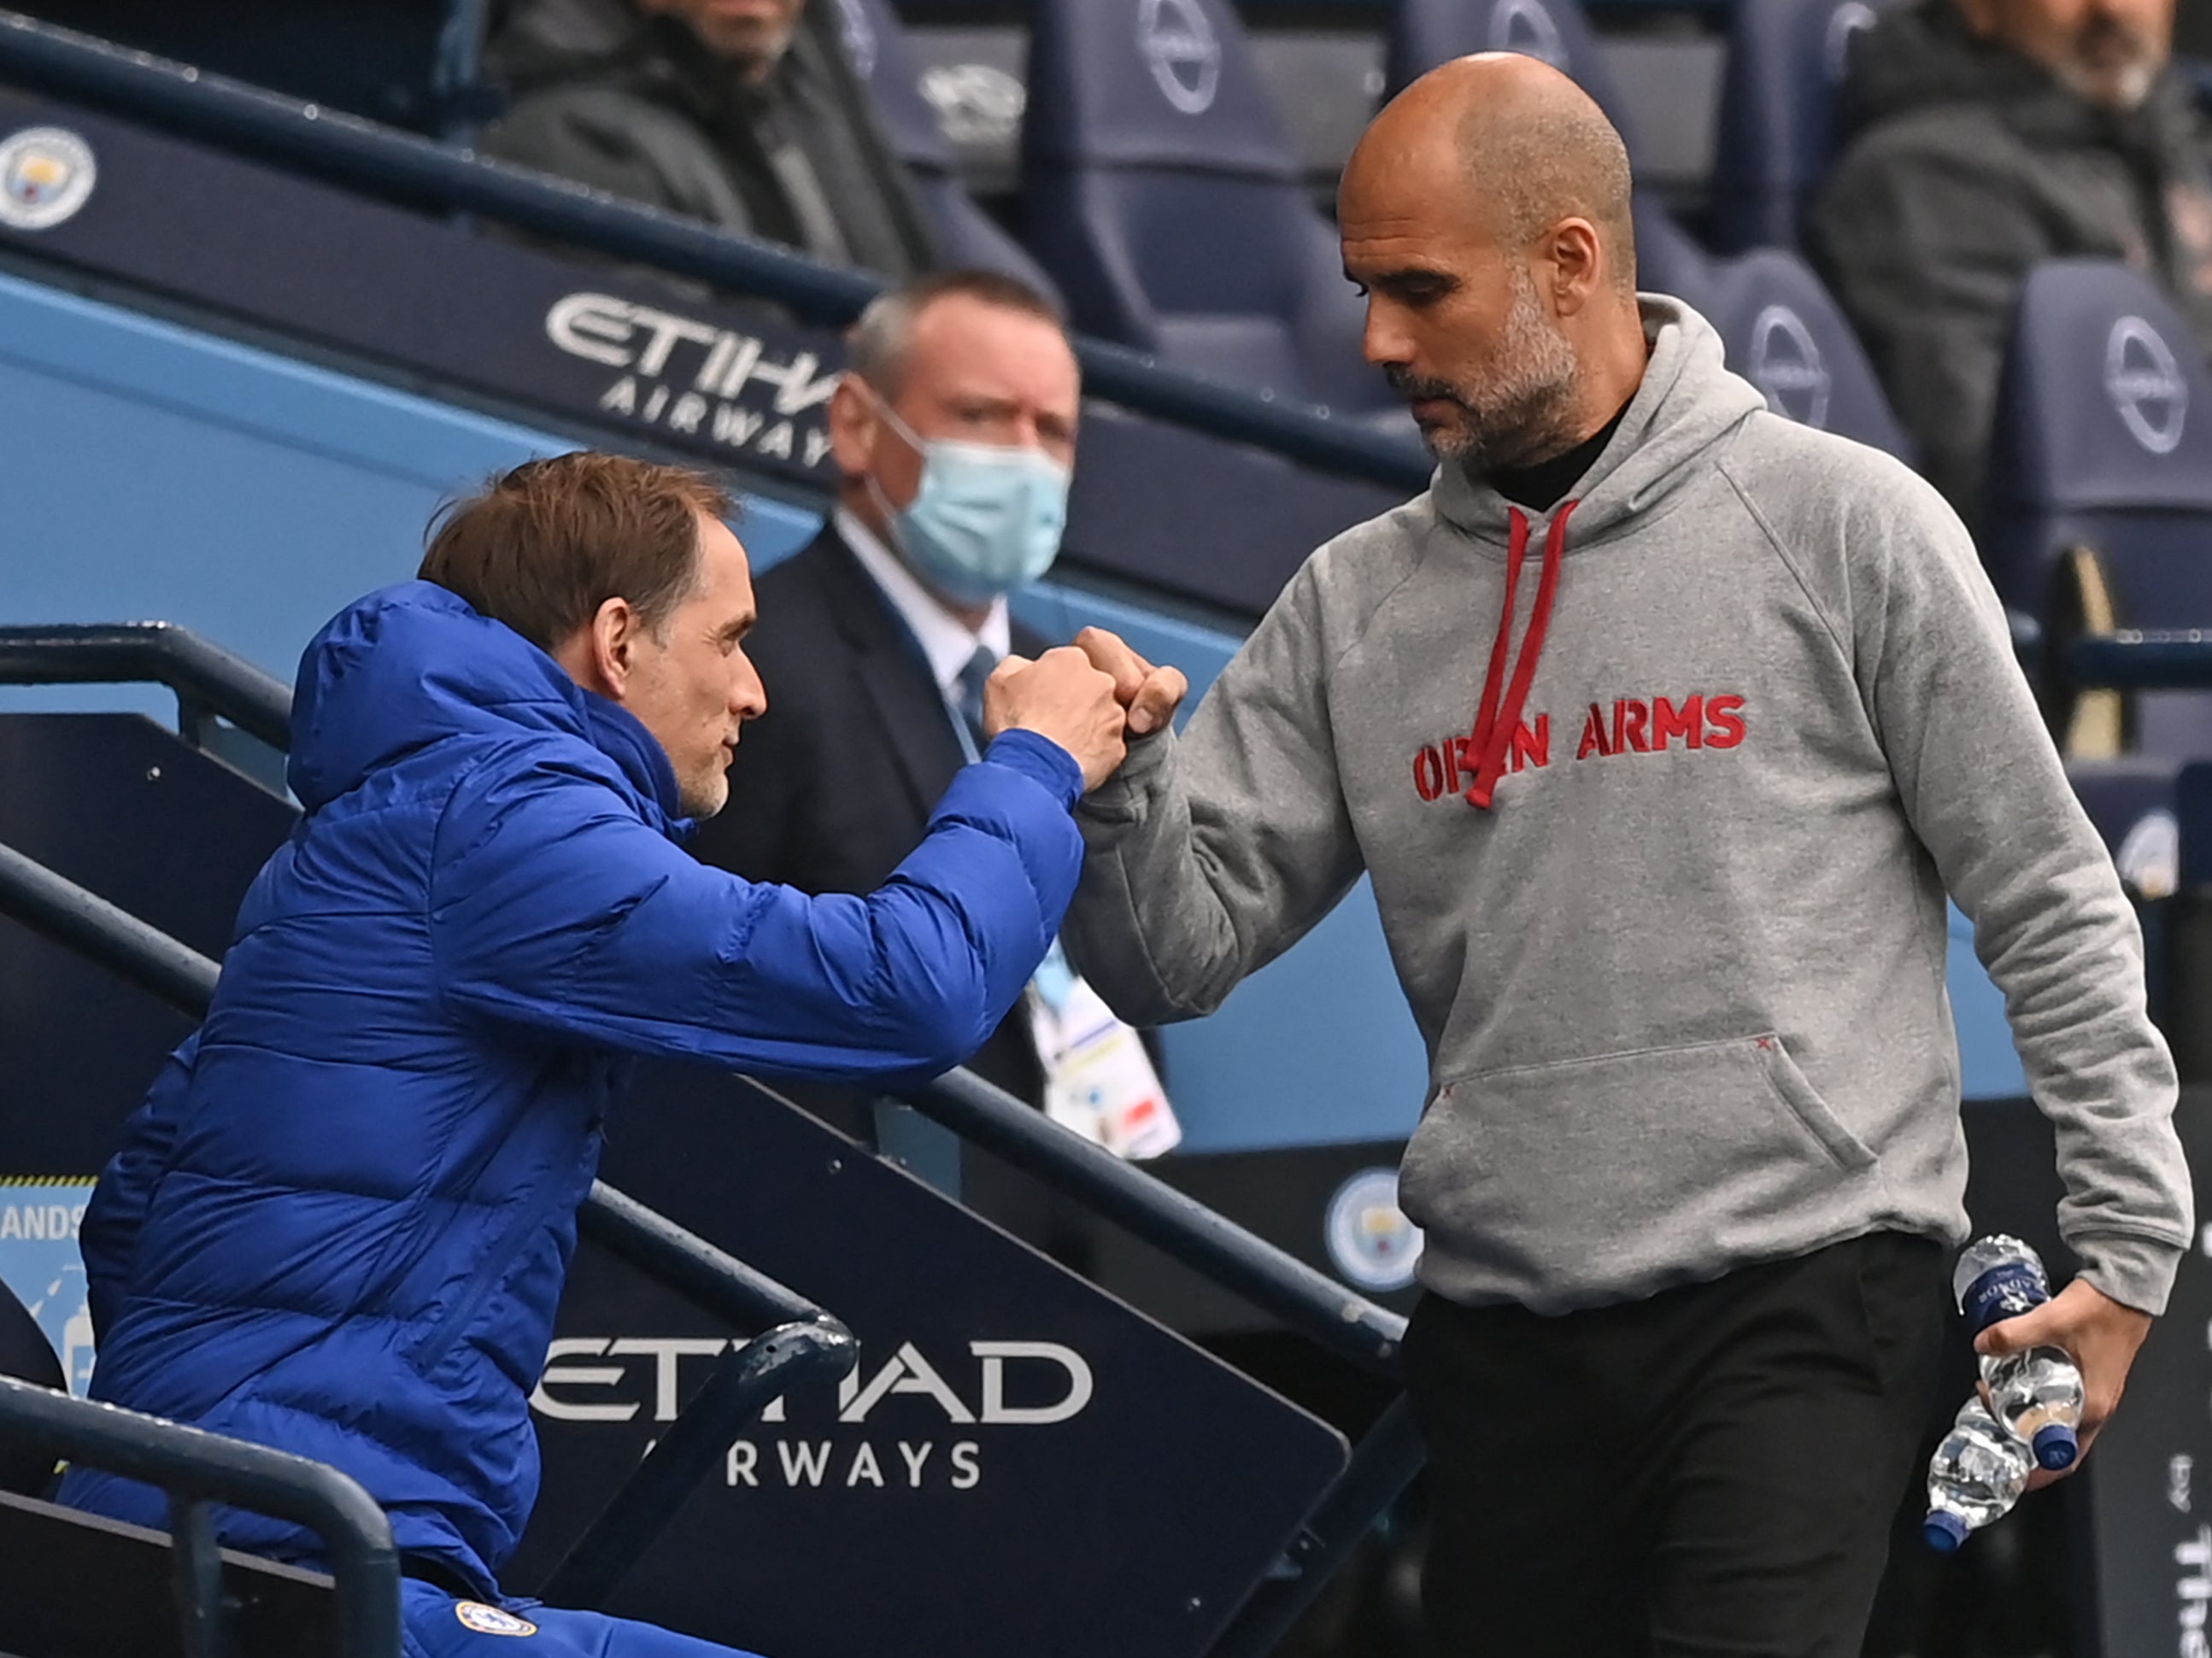 Chelsea manager Thomas Tuchel and Manchester City boss Pep Guardiola